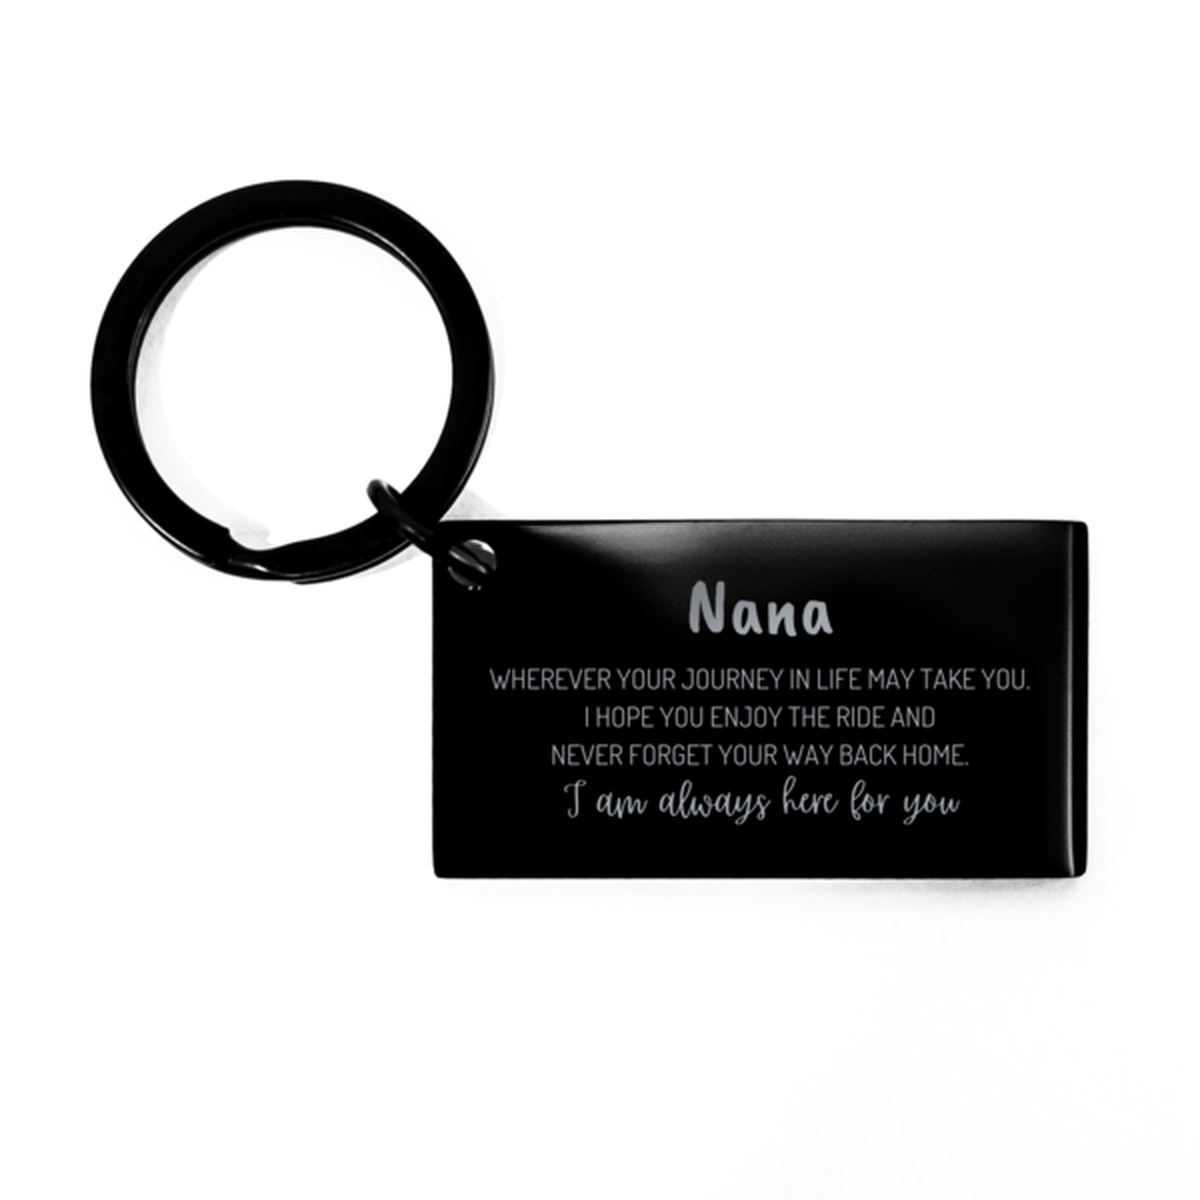 Nana wherever your journey in life may take you, I am always here for you Nana Keychain, Awesome Christmas Gifts For Nana, Nana Birthday Gifts for Men Women Family Loved One